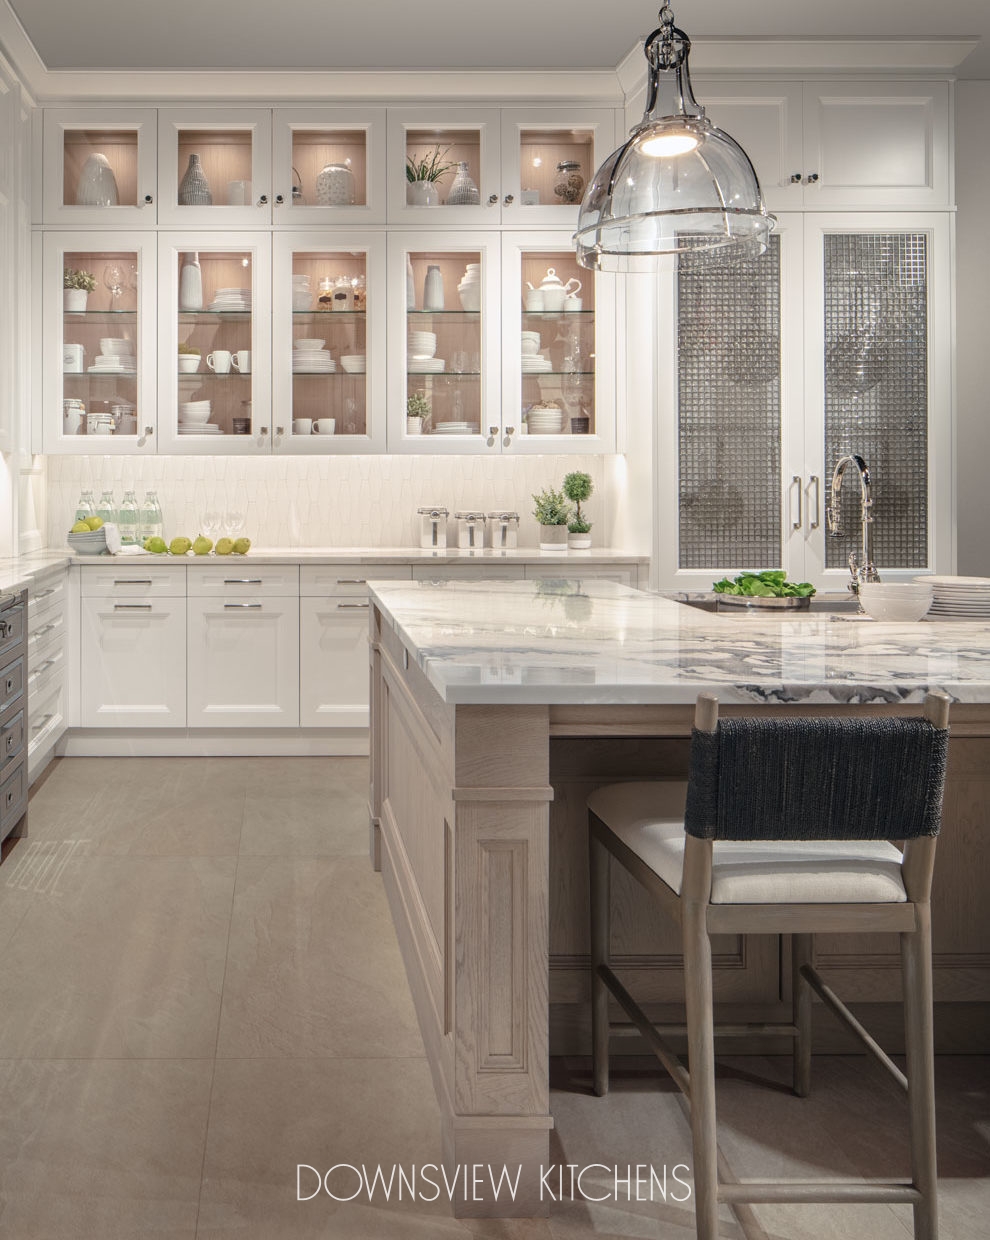 NEW ENGLAND APPEAL - Downsview Kitchens and Fine Custom Cabinetry ...